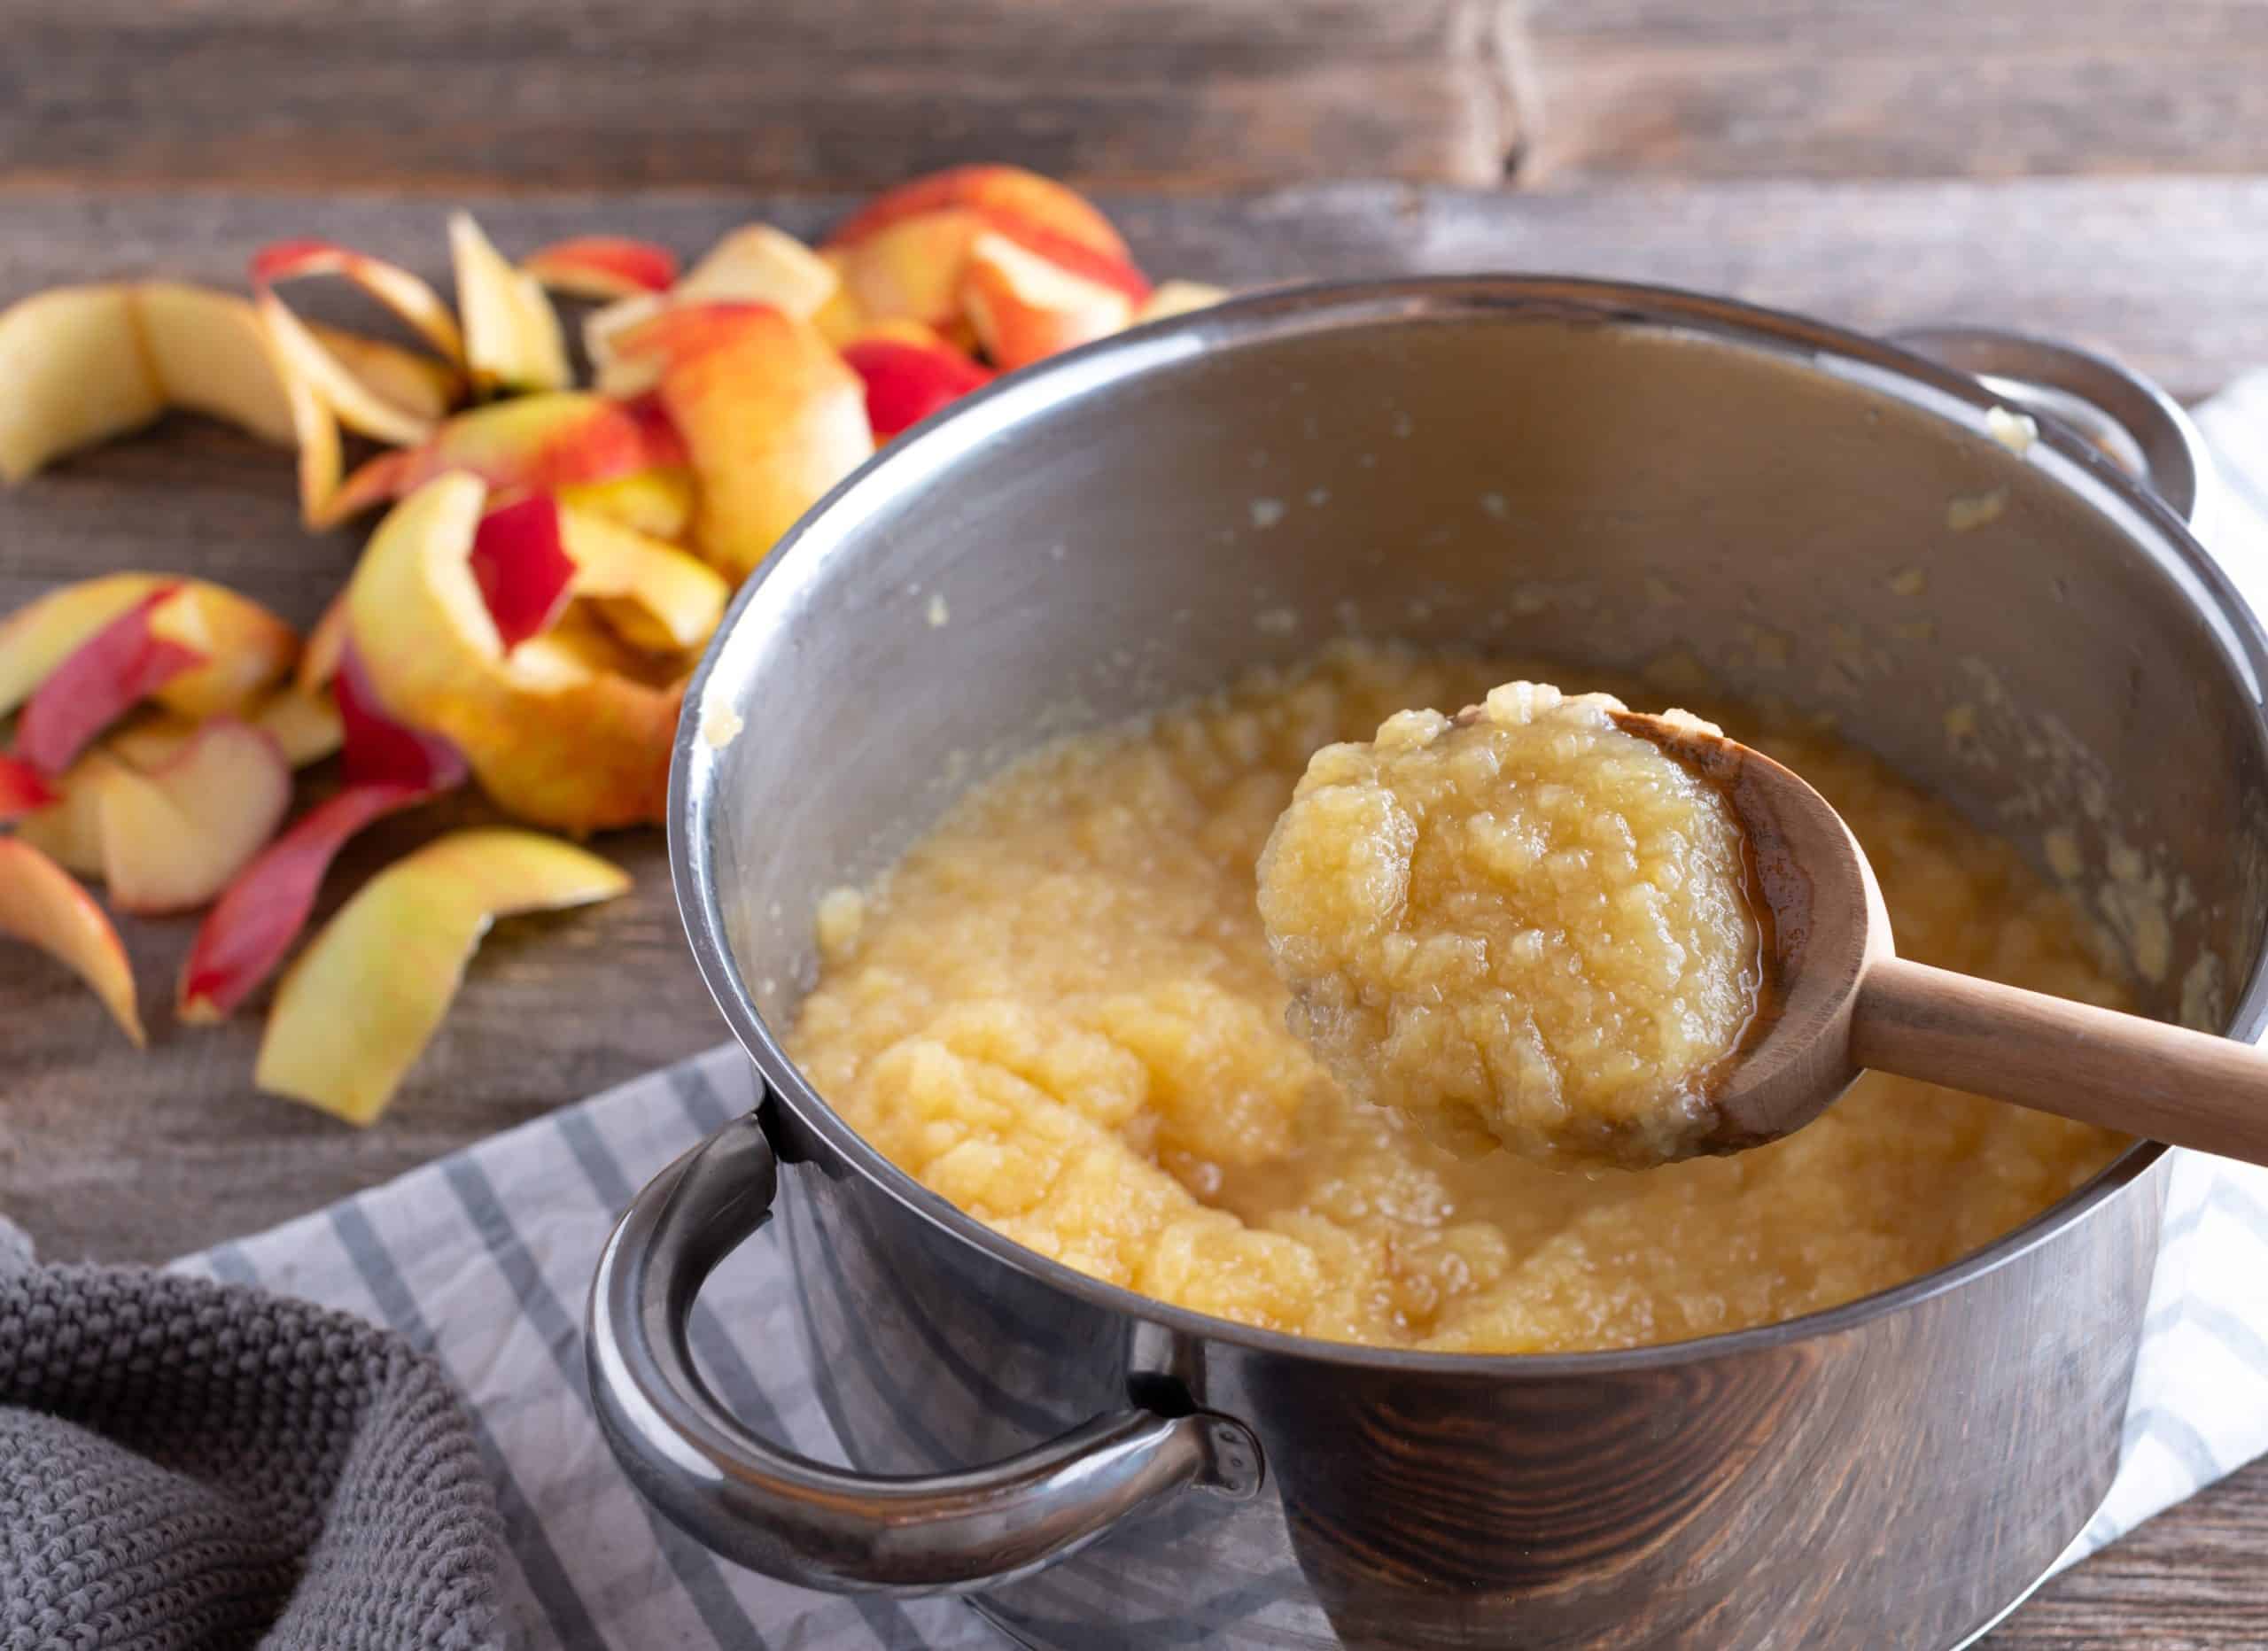 Homemade,Applesauce,In,A,Pot,With,Wooden,Spoon